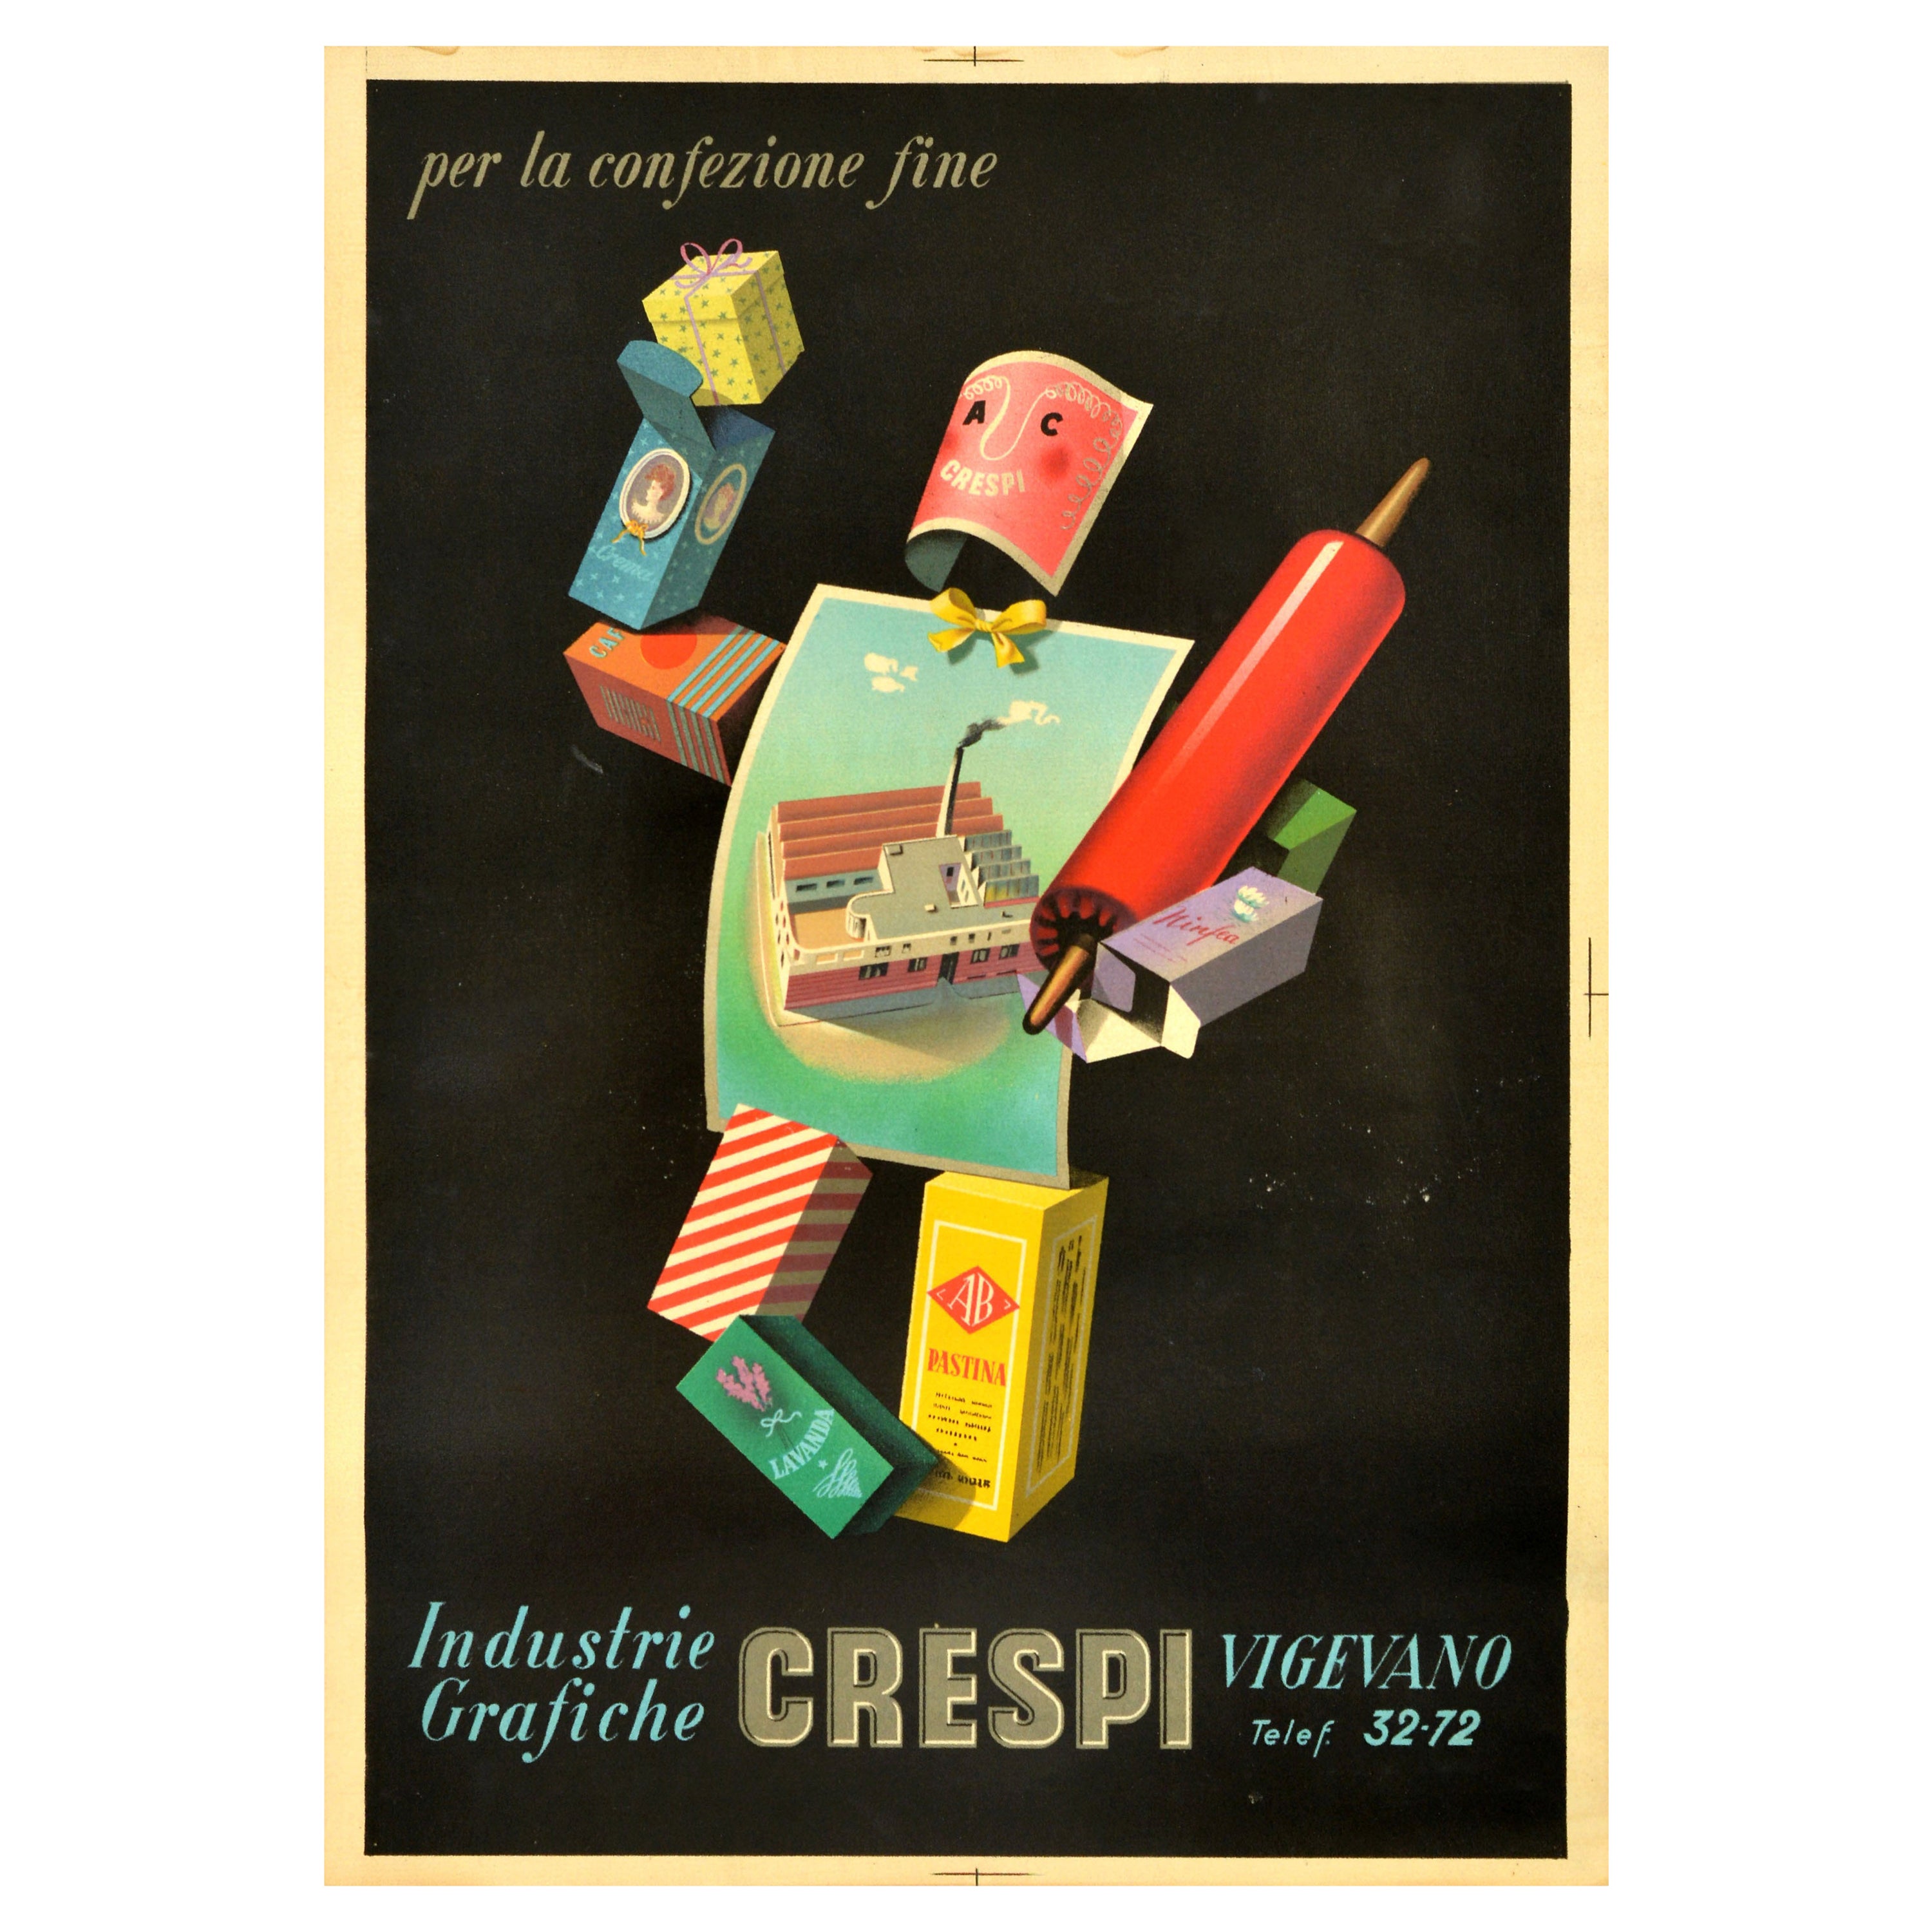 Original Vintage Advertising Poster Industrie Grafiche Crespi Packaging Italy